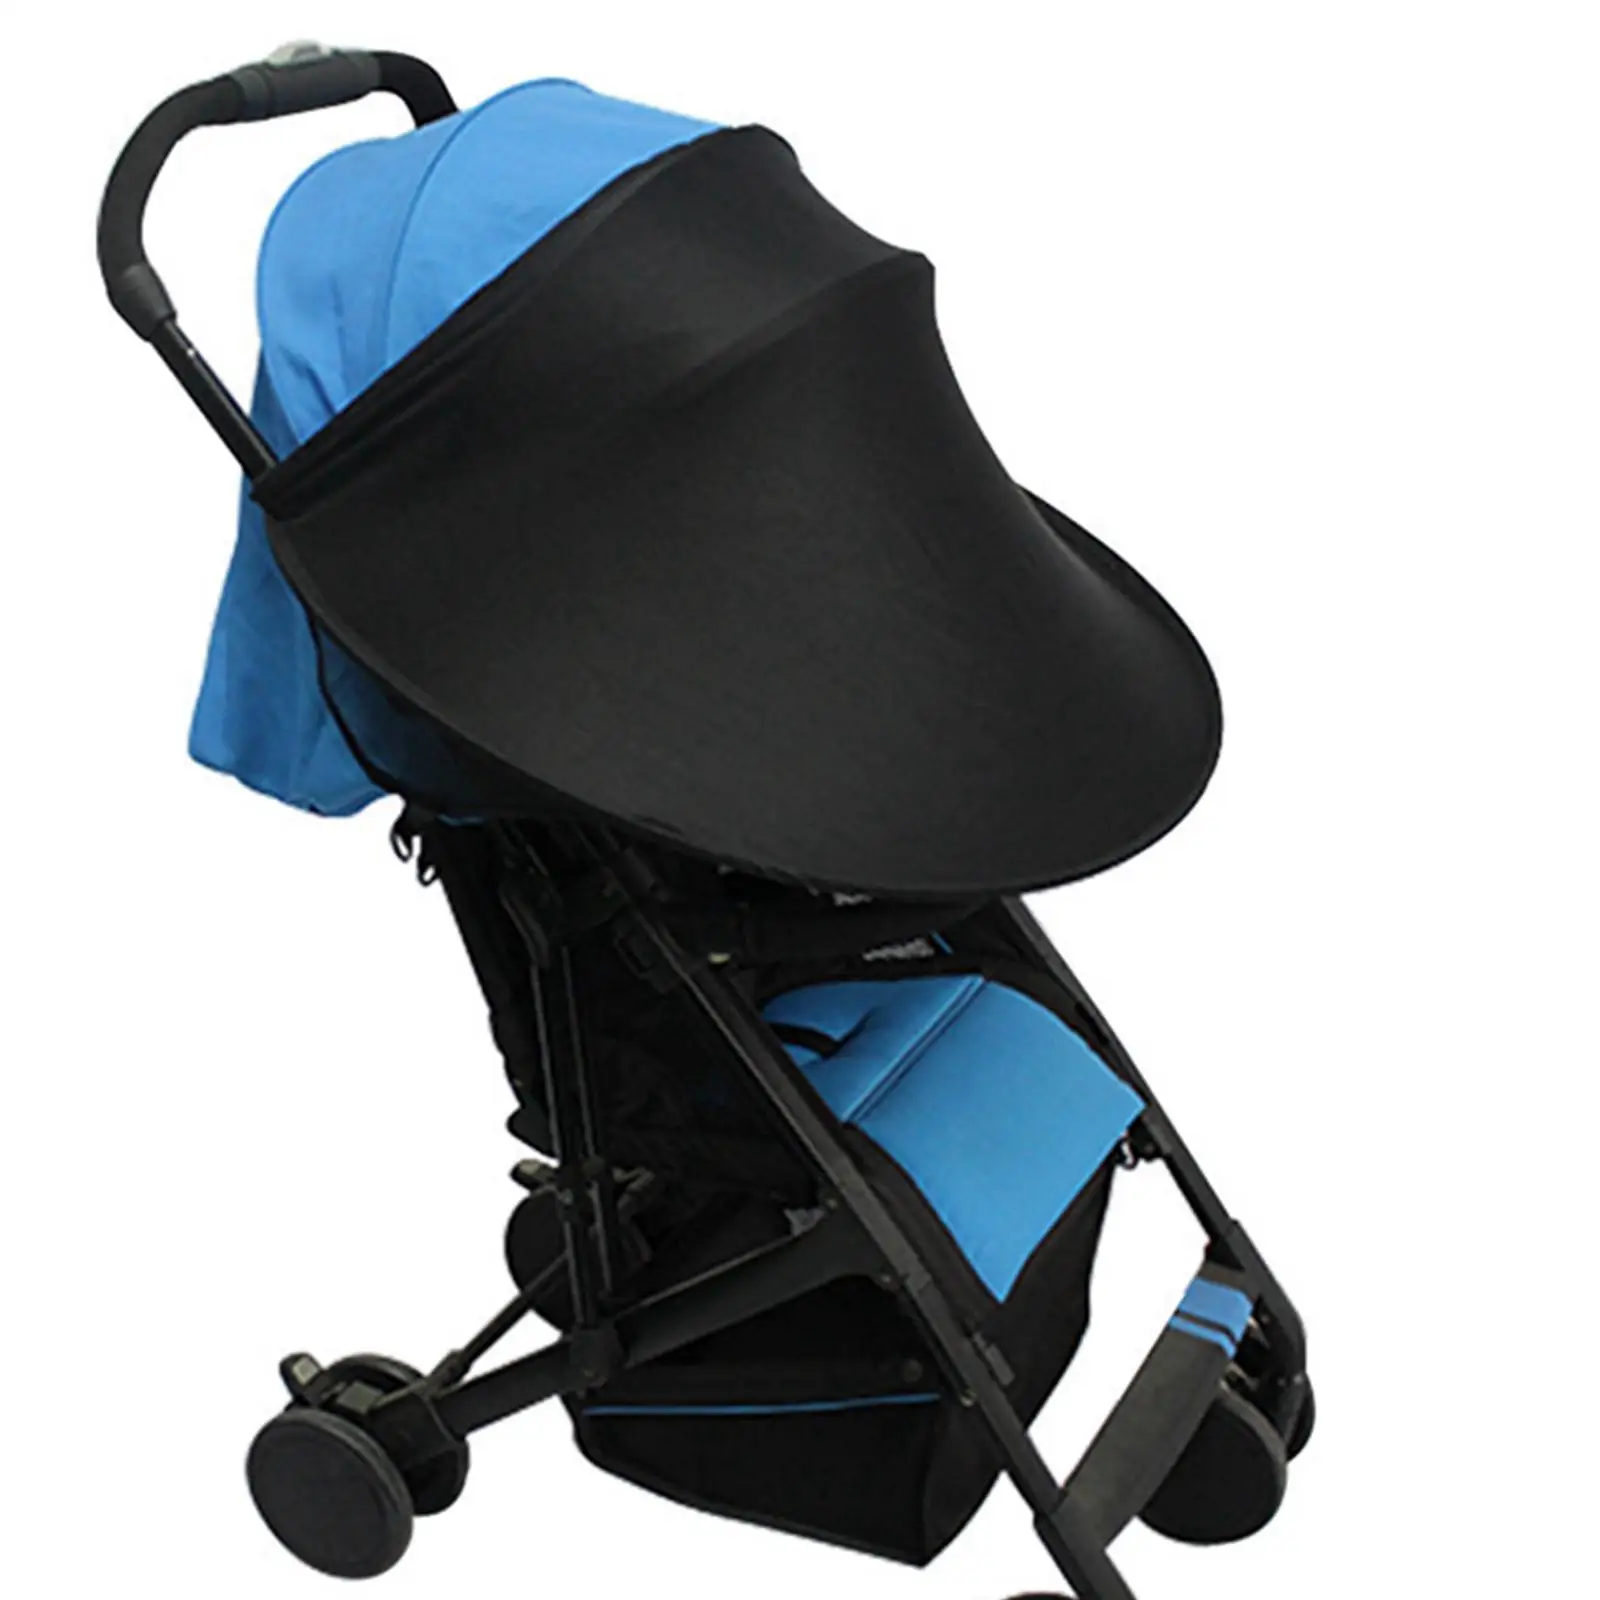 Baby Stroller Sunshade Nylon Fabric Foldable Windproof Breathable Carriage Sun Shade Canopy for Outdoor Stroller Pushchair Pram